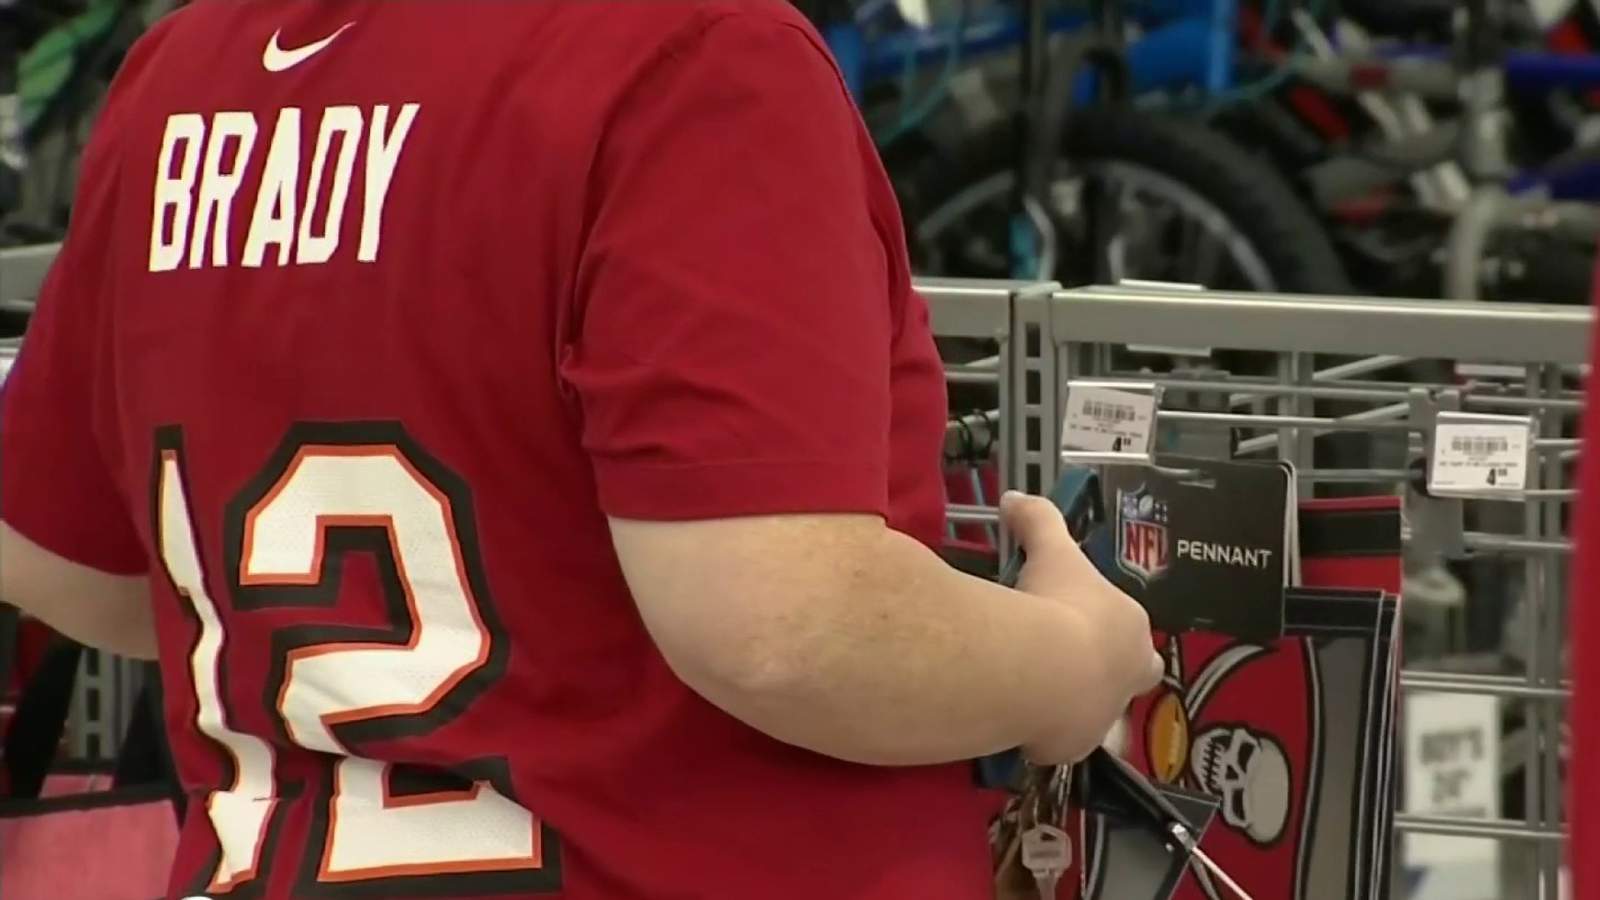 Central Florida retailers gearing up for Super Bowl weekend